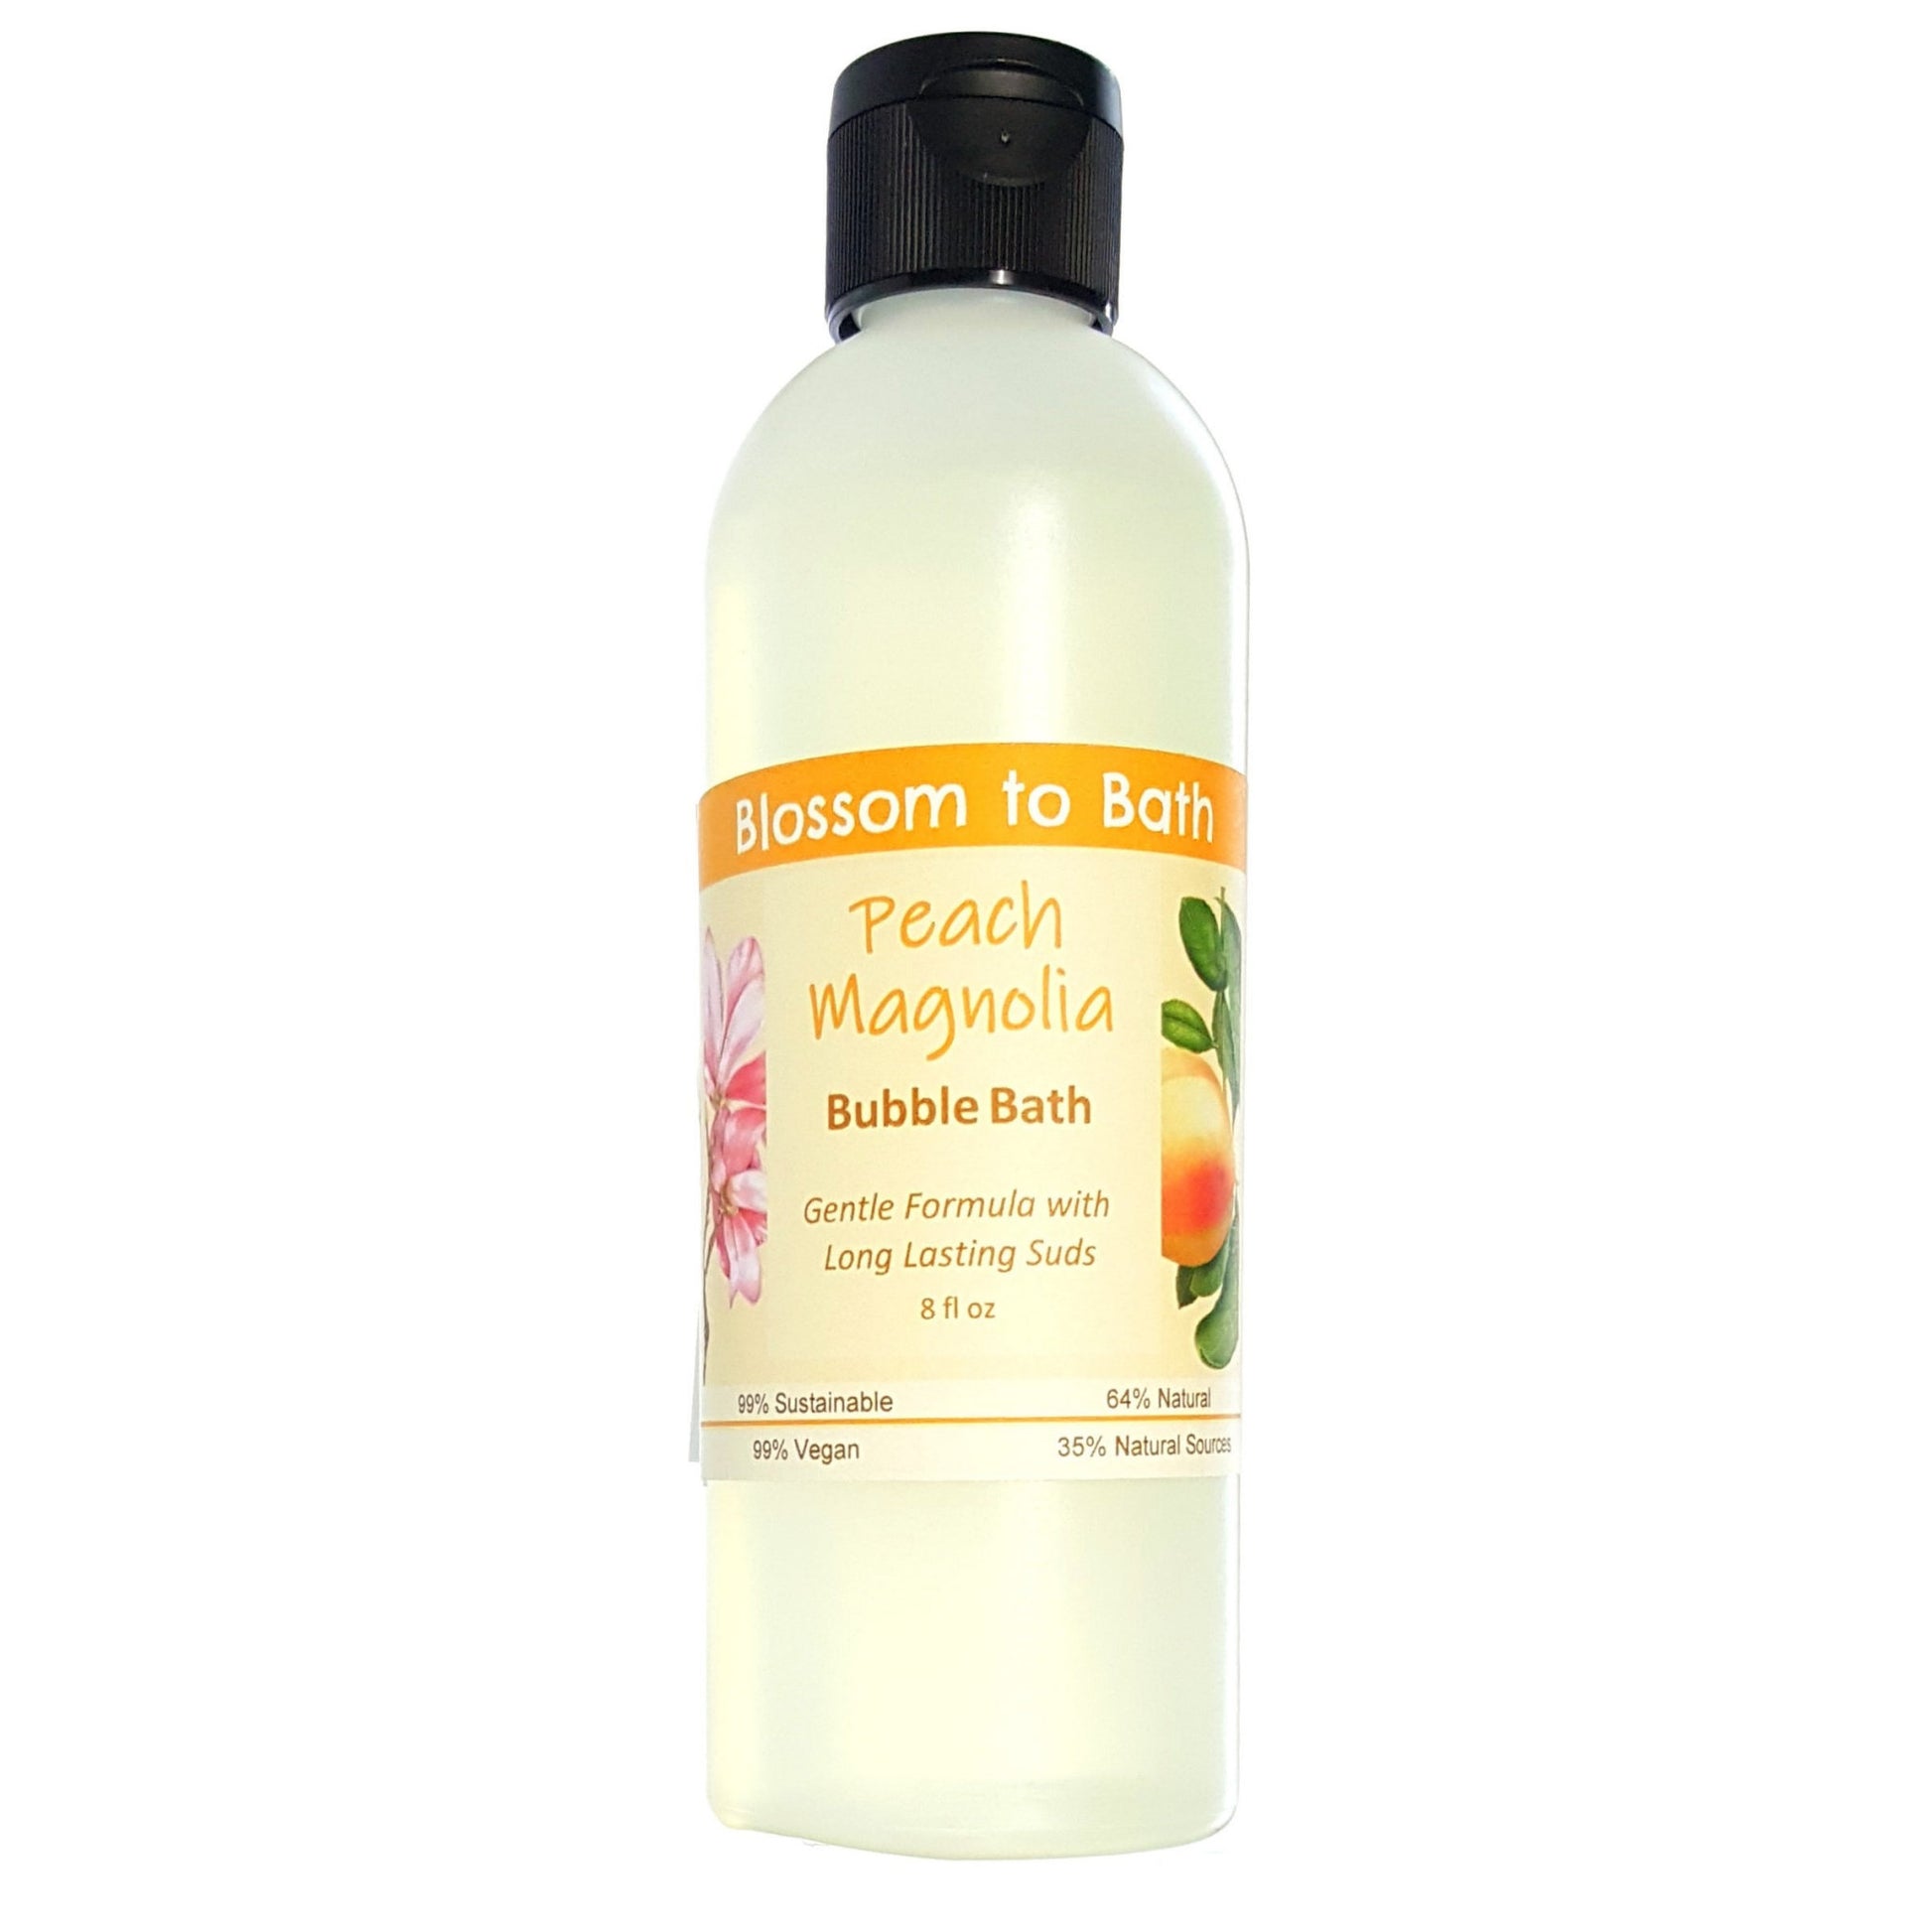 Buy Blossom to Bath Peach Magnolia Bubble Bath from Flowersong Soap Studio.  Lively, long lasting  bubbles in a gentle plant based formula for maximum relaxation time  An intoxicating blend of peach, magnolia, and raspberry.